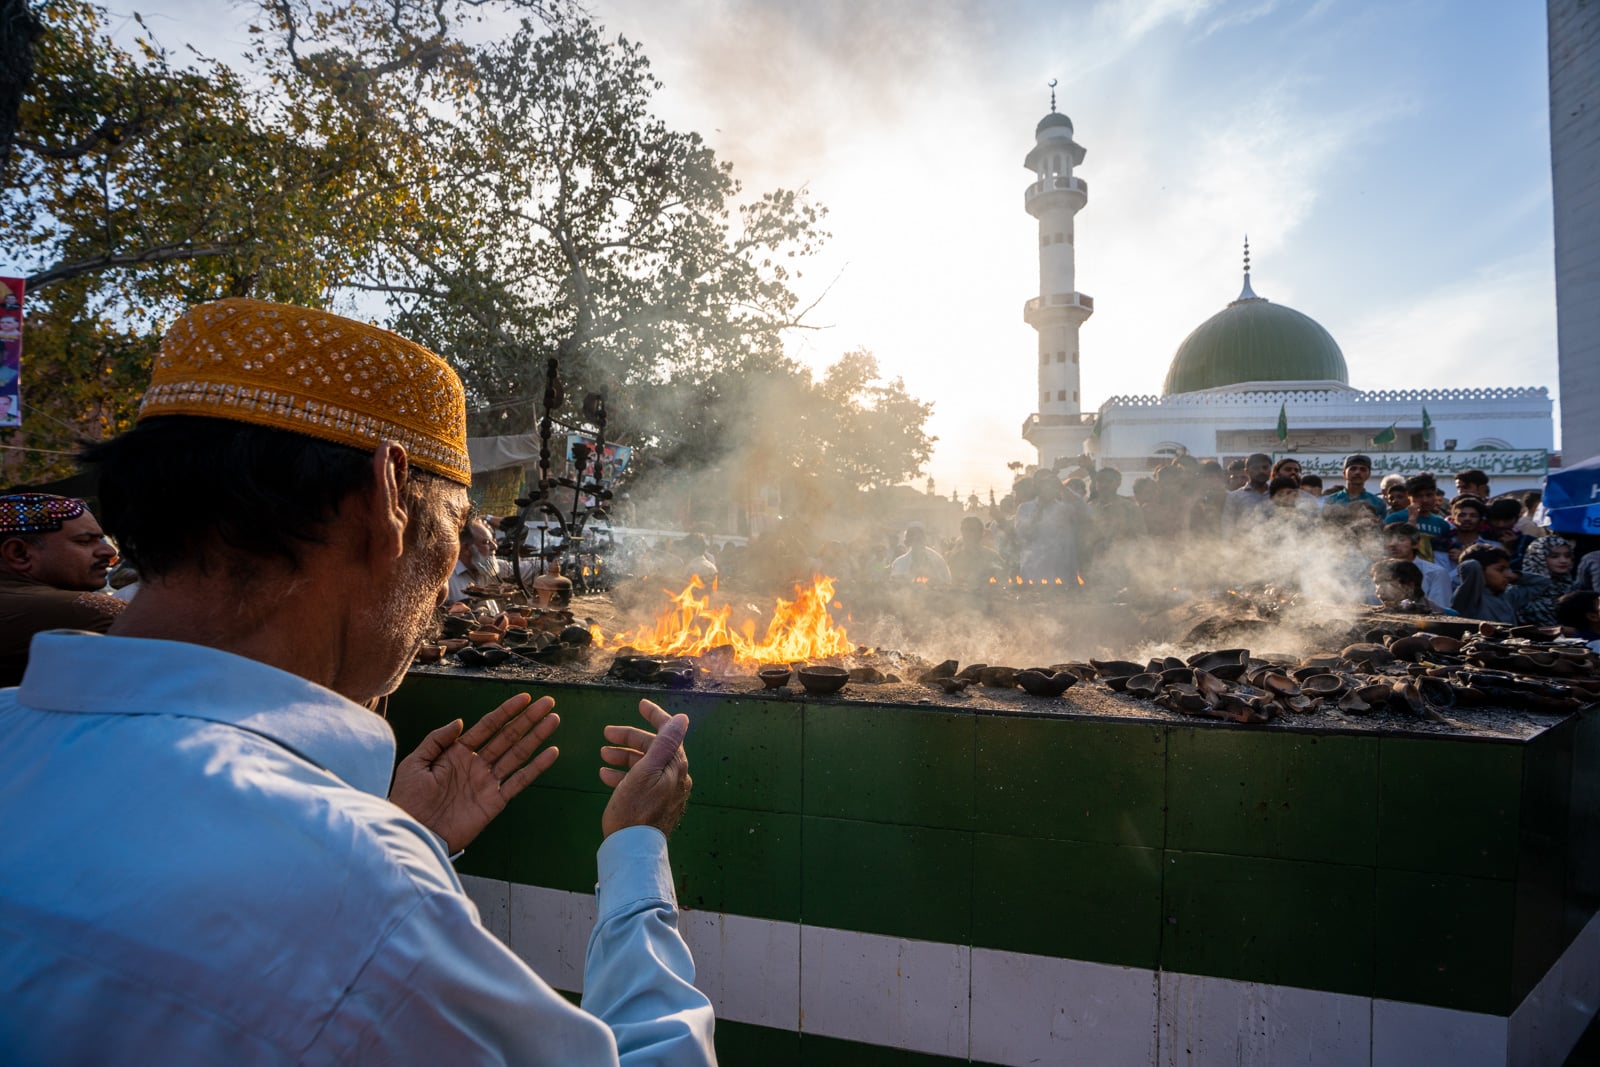 A man praying at a Sufi shrine in Lahore